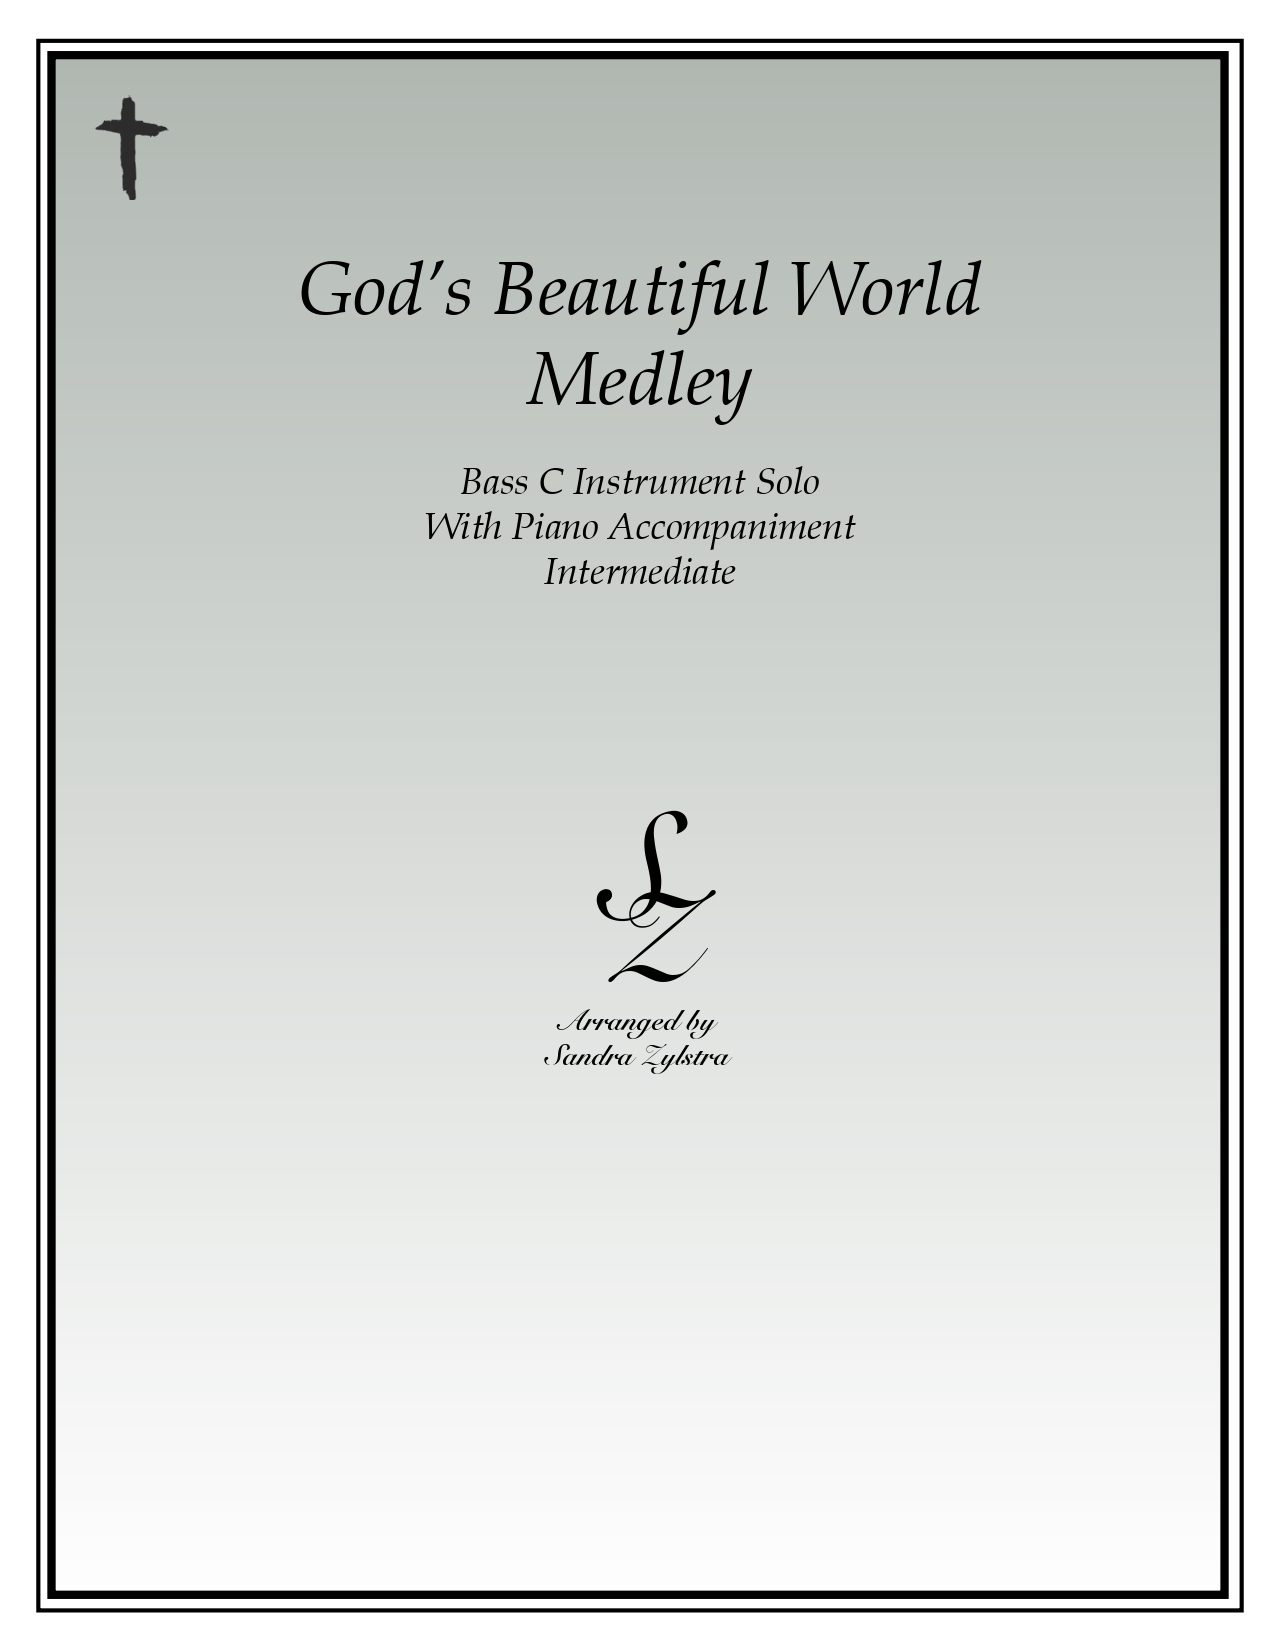 Gods Beautiful World bass C instrument solo part cover page 00011